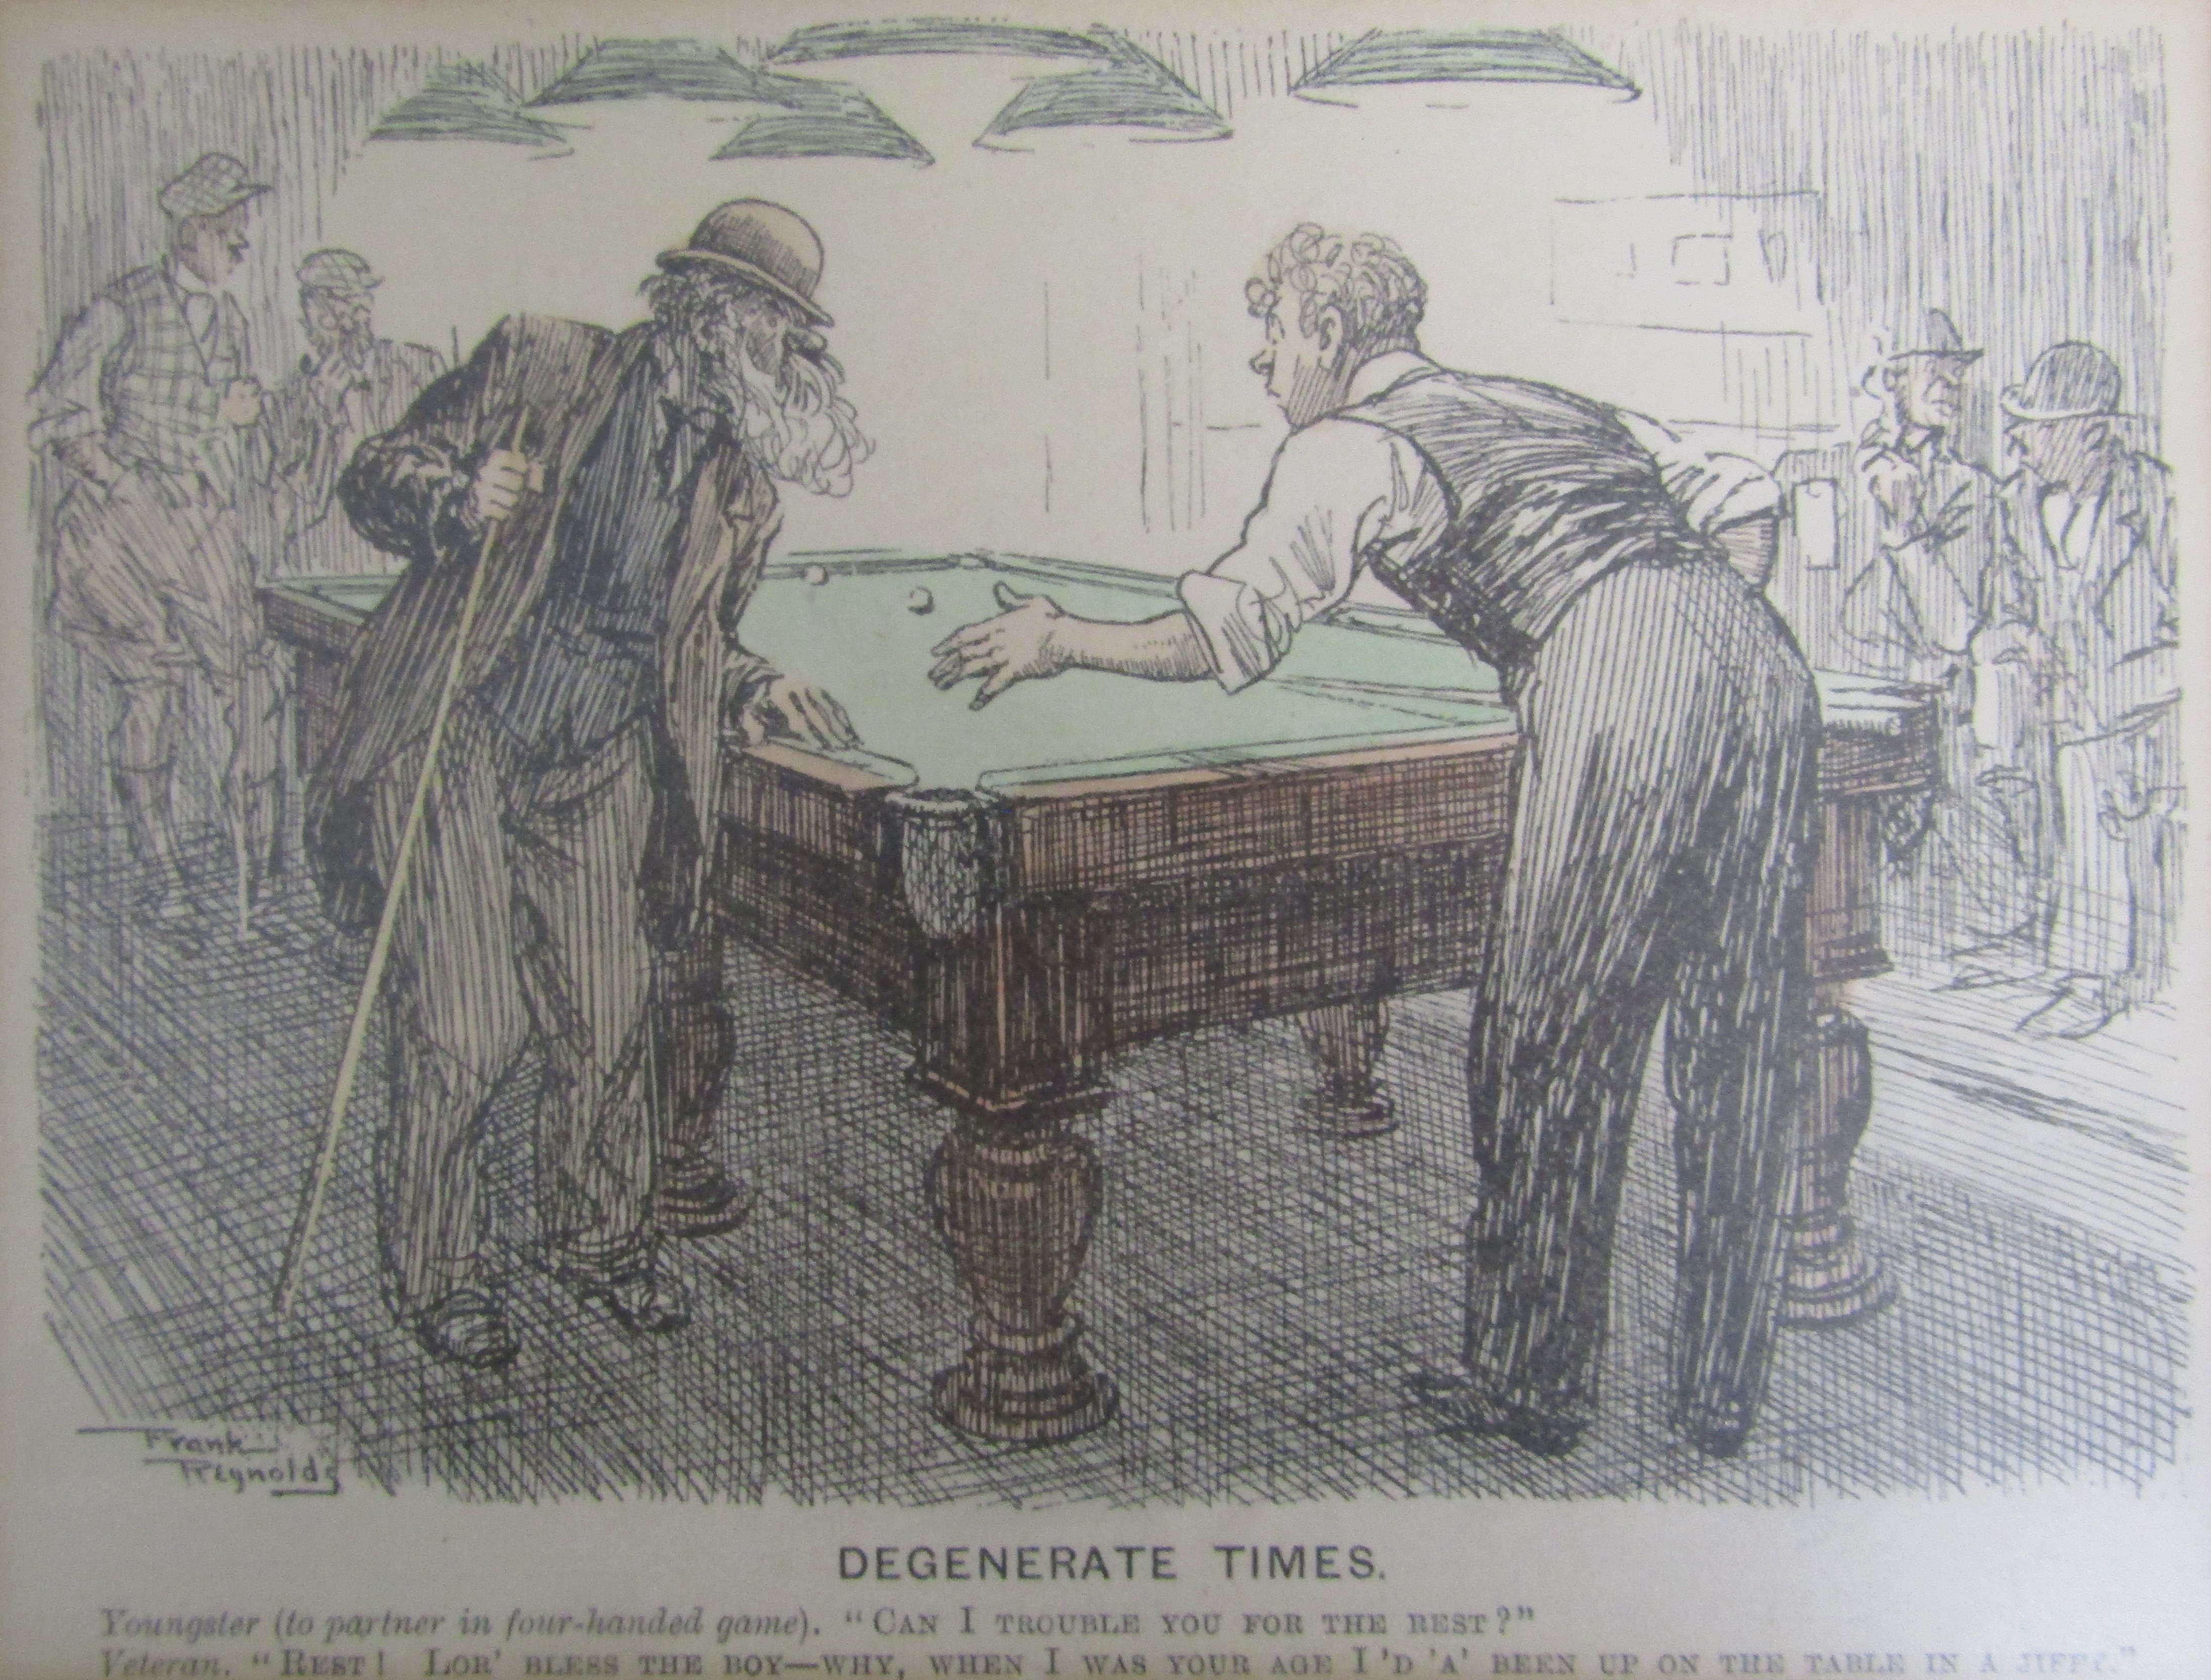 Snooker prints - Frank Reynolds 'Degenerate Times, Shepperson? 'Manners Modes', Riley's Billiard - Image 2 of 9